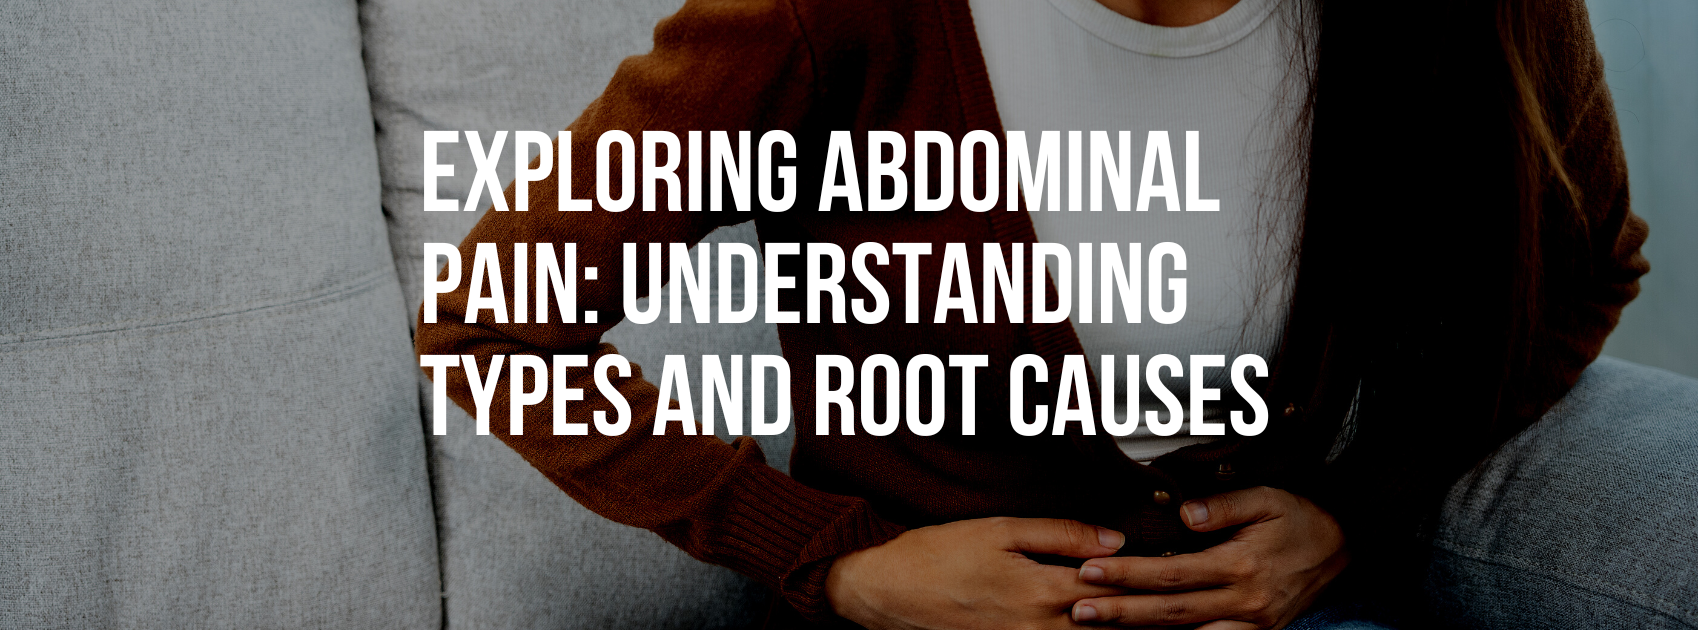 Exploring Abdominal Pain: Understanding Types and Root Causes